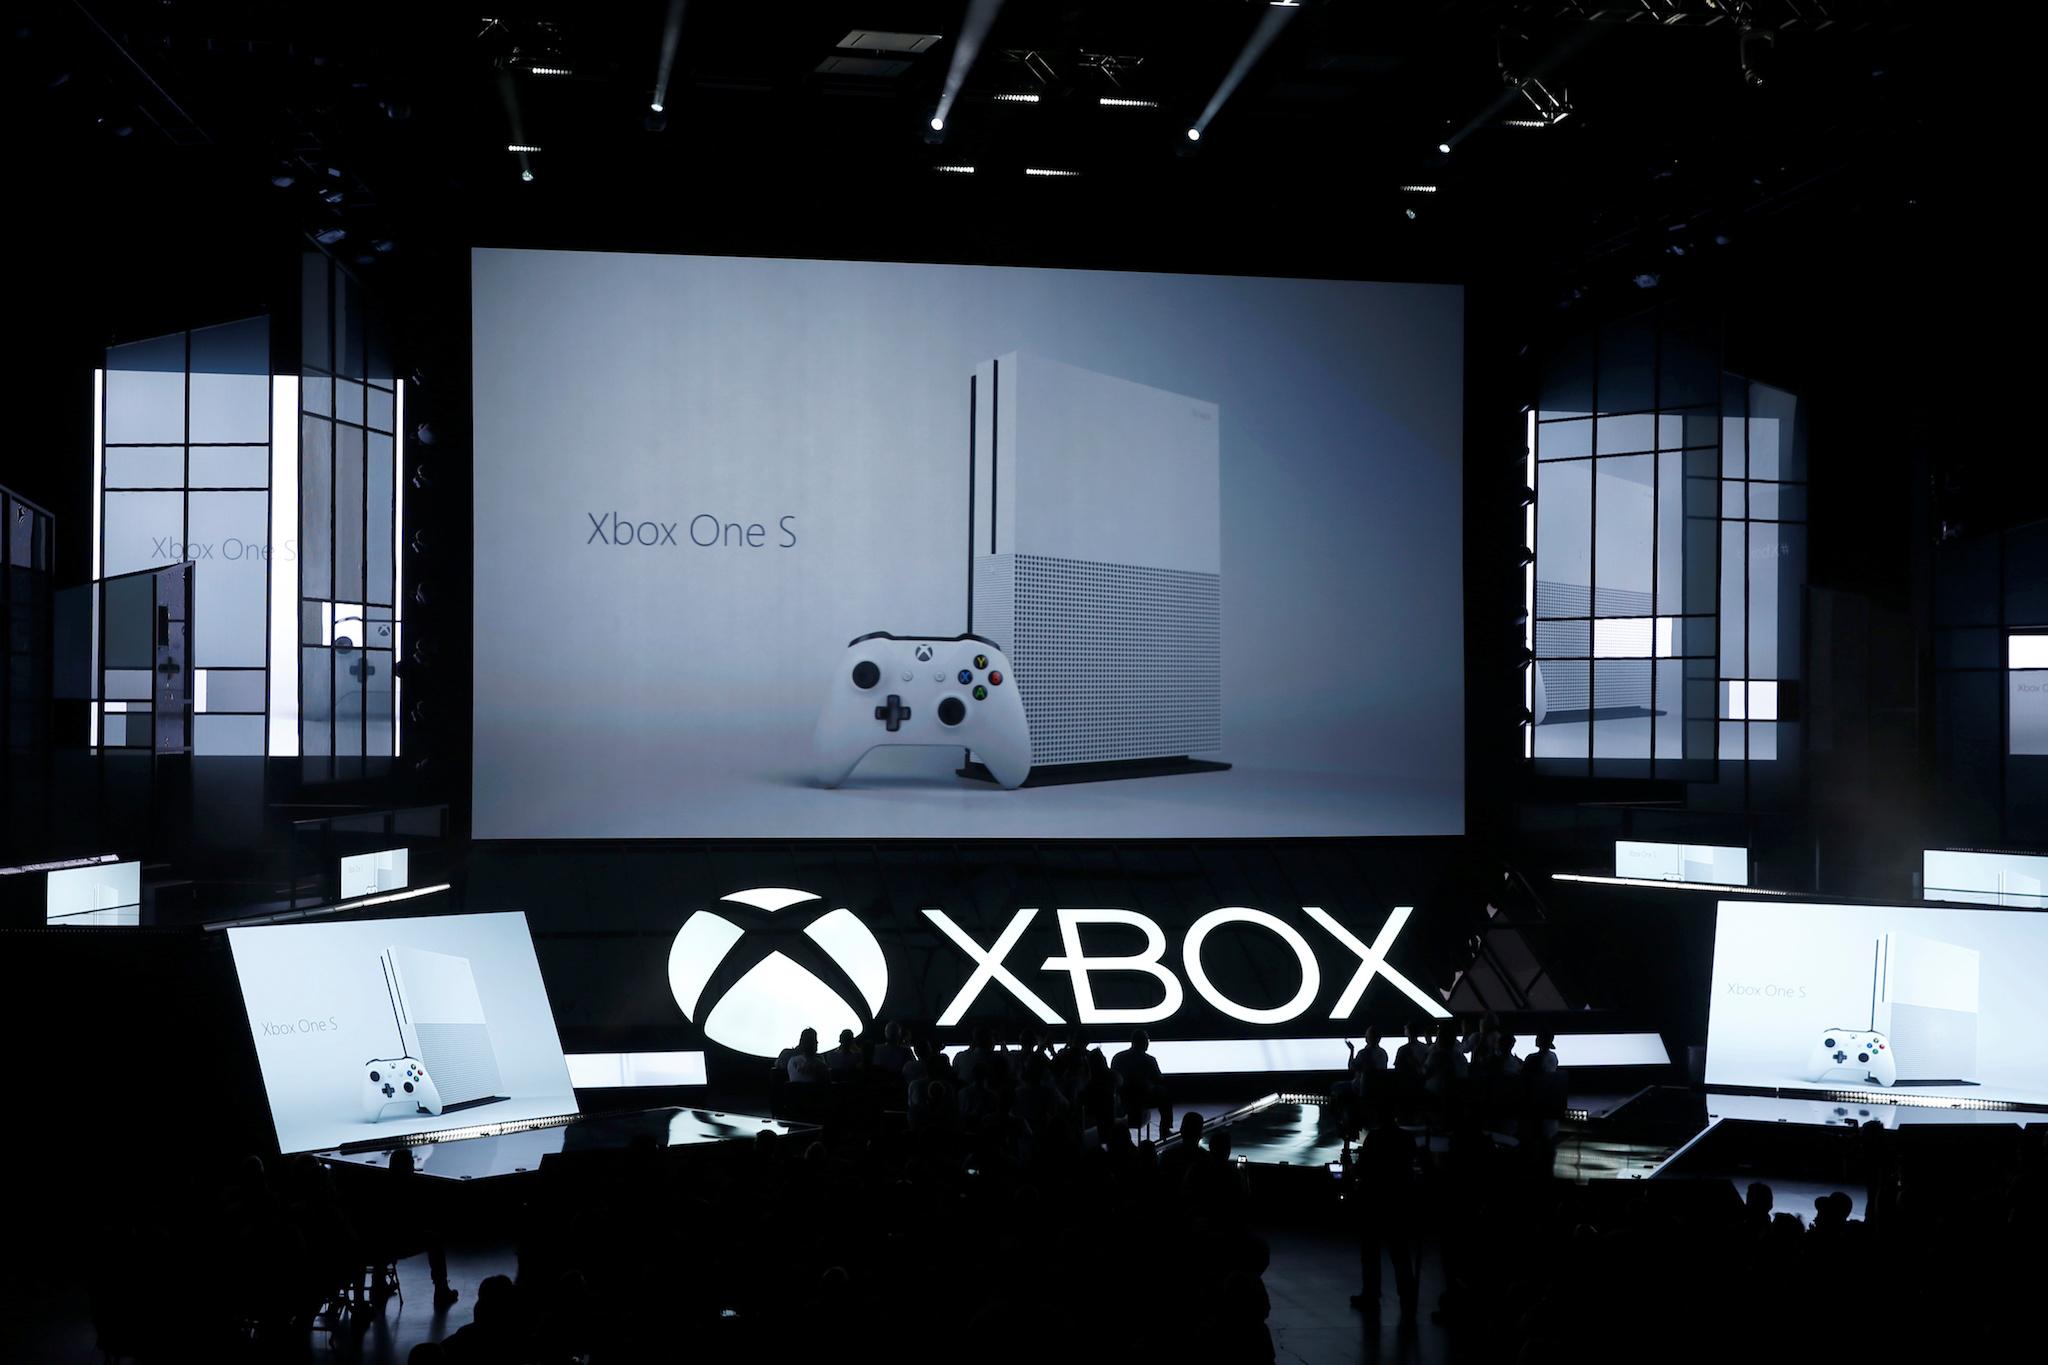 Microsoft displays its Xbox One S console at the Xbox E3 2016 media briefing in Los Angeles, California, U.S., June 13, 2016